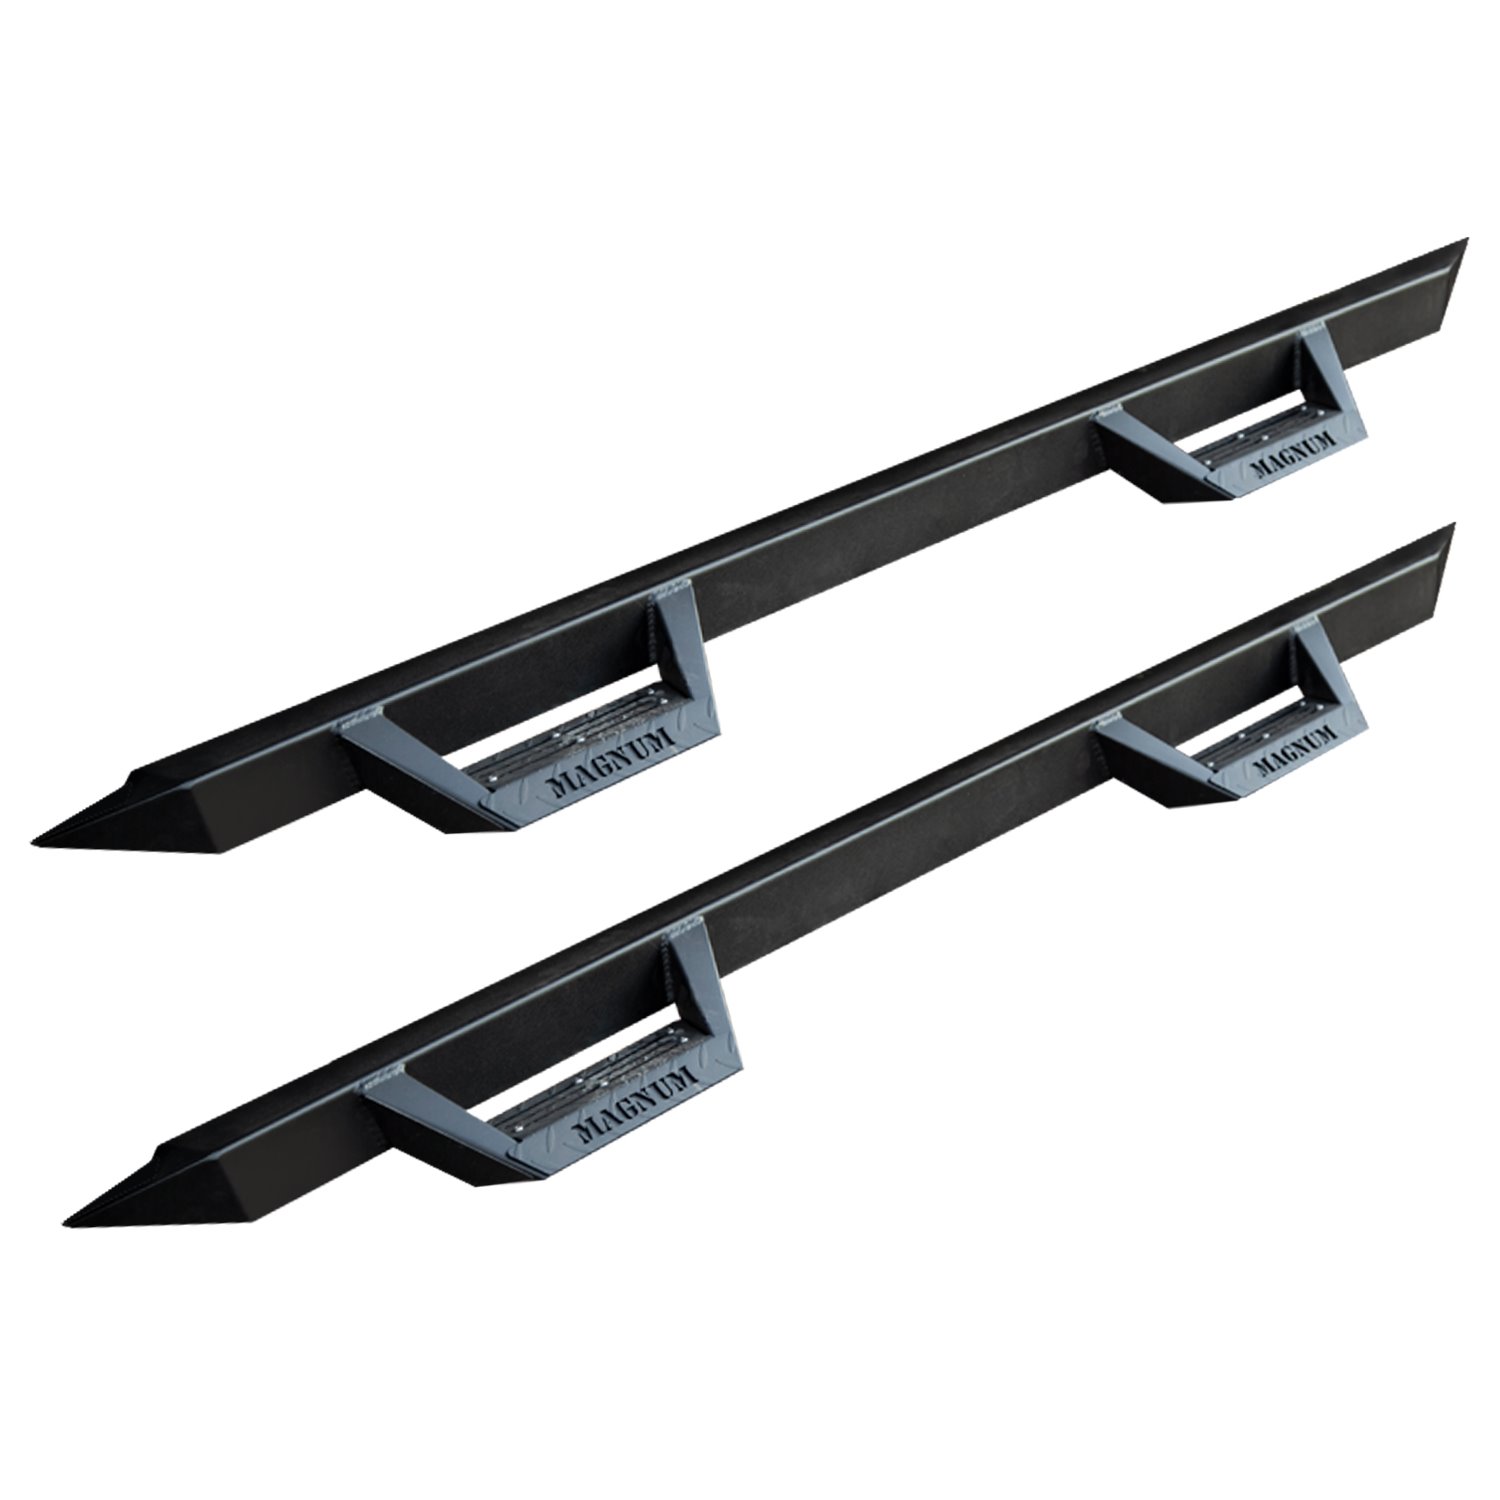 RTS79TY Magnum RT Drop Steps, Black Textured Alloy Steel, 05-23 Toyota Tacoma Access/Extended Cab